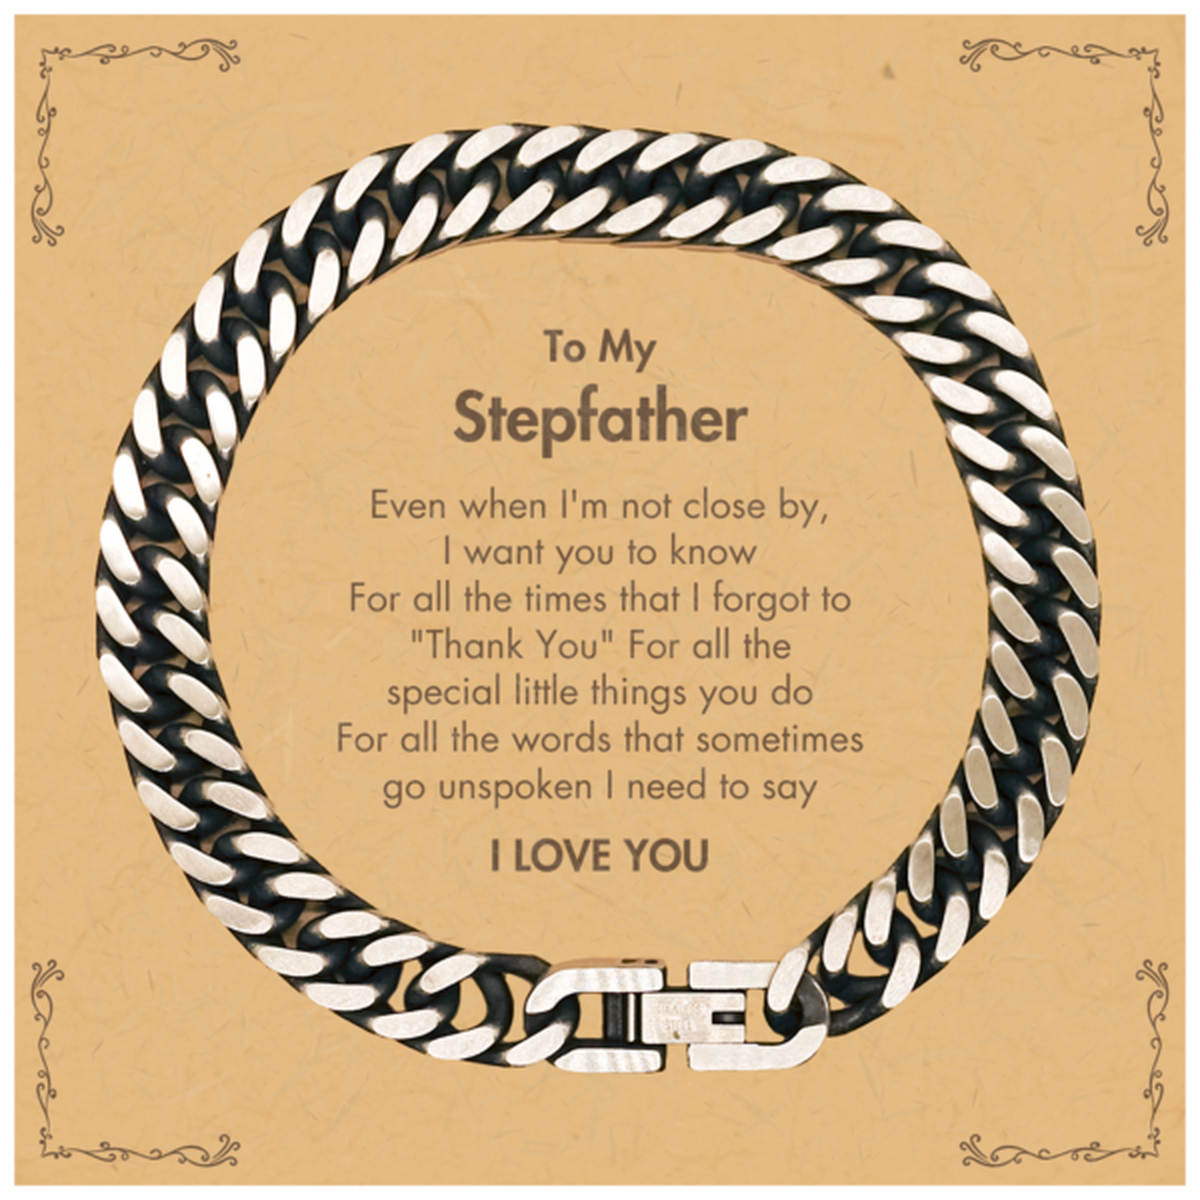 Thank You Gifts for Stepfather, Keepsake Cuban Link Chain Bracelet Gifts for Stepfather Birthday Mother's day Father's Day Stepfather For all the words That sometimes go unspoken I need to say I LOVE YOU